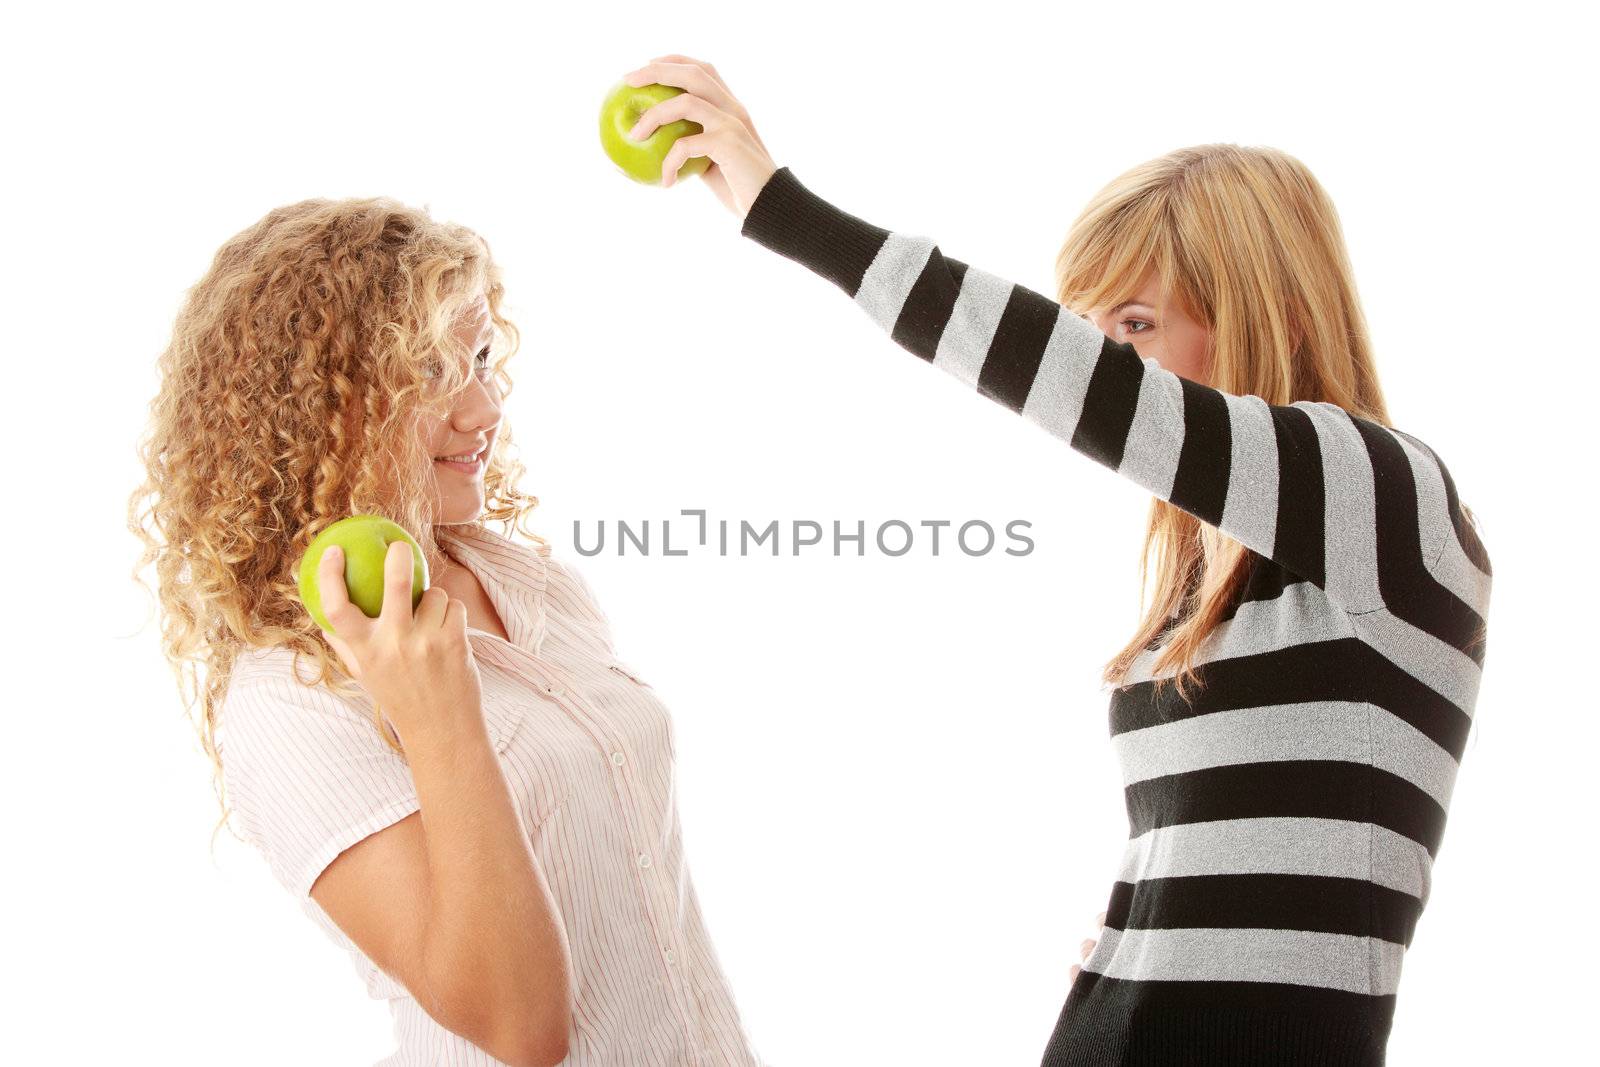 Two teen girlfriends eating green apples isolated